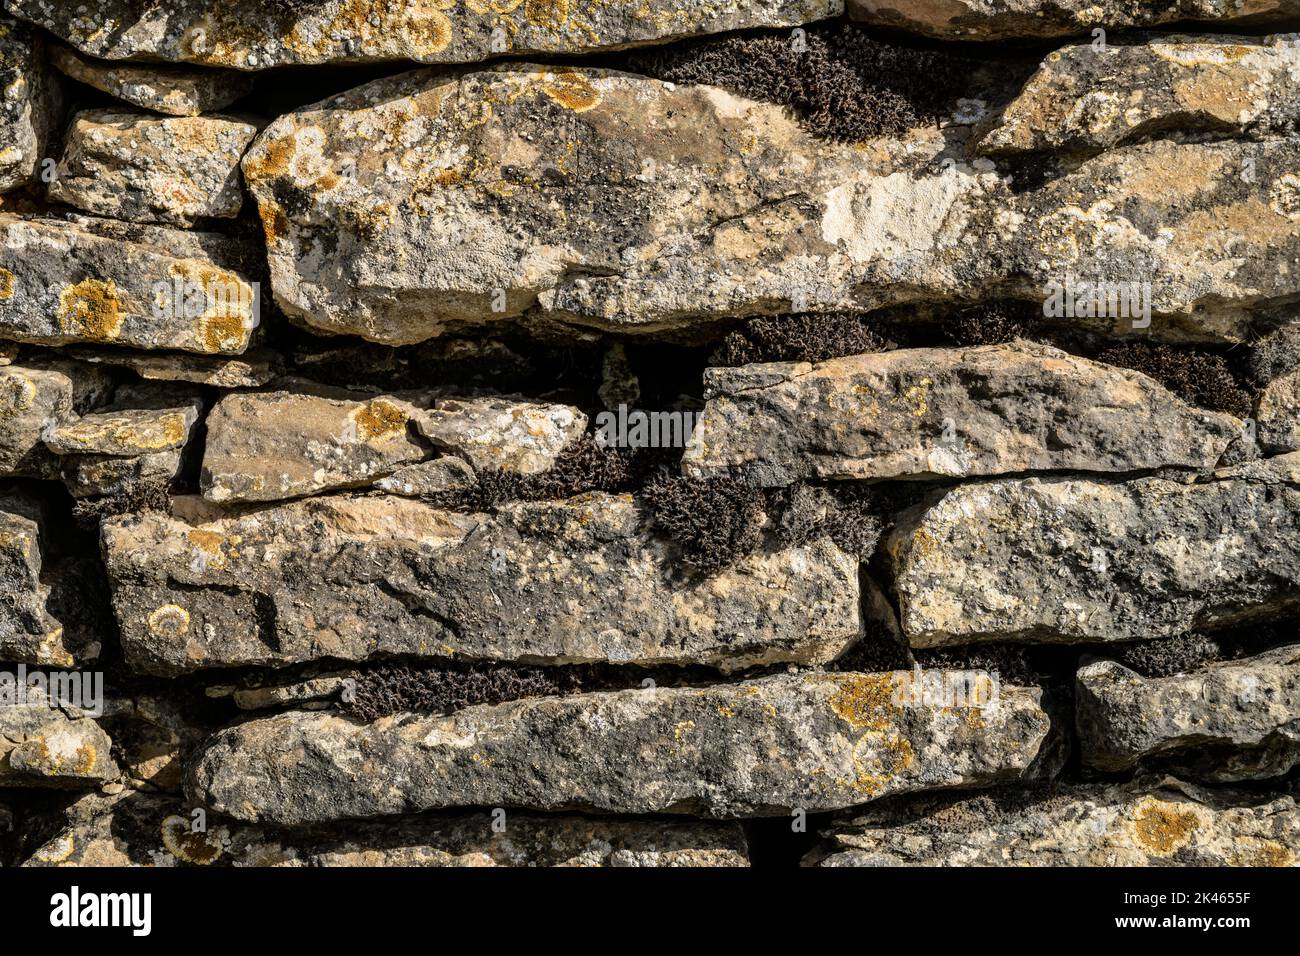 Dry stone walling that encloses some of the vineyards in the Beaune area, Burgundy, France. Stock Photo